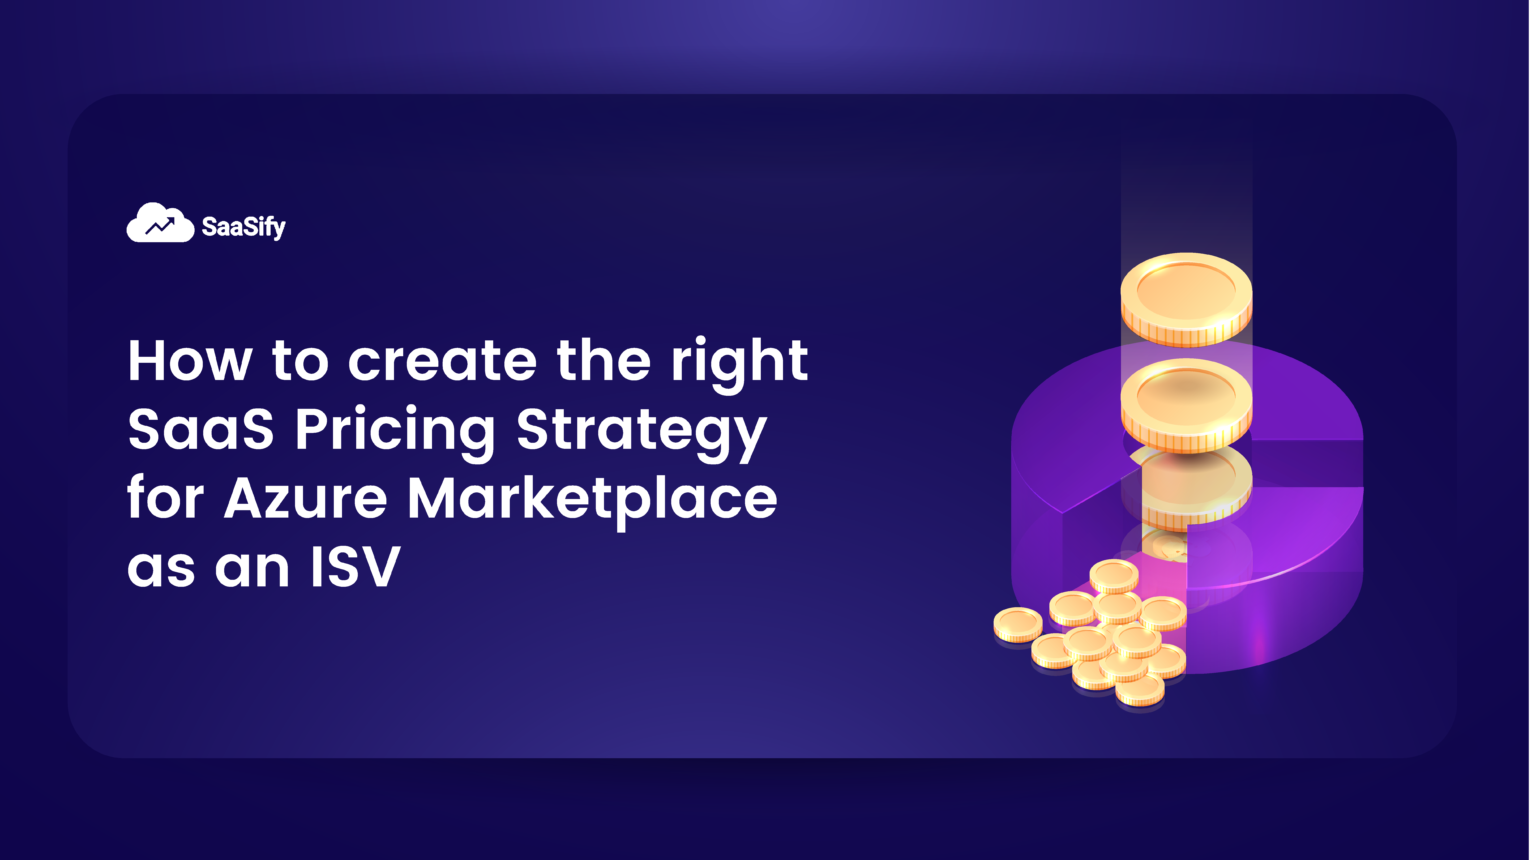 How to create the right SaaS Pricing Strategy for Azure Marketplace as an ISV 1536x860 1